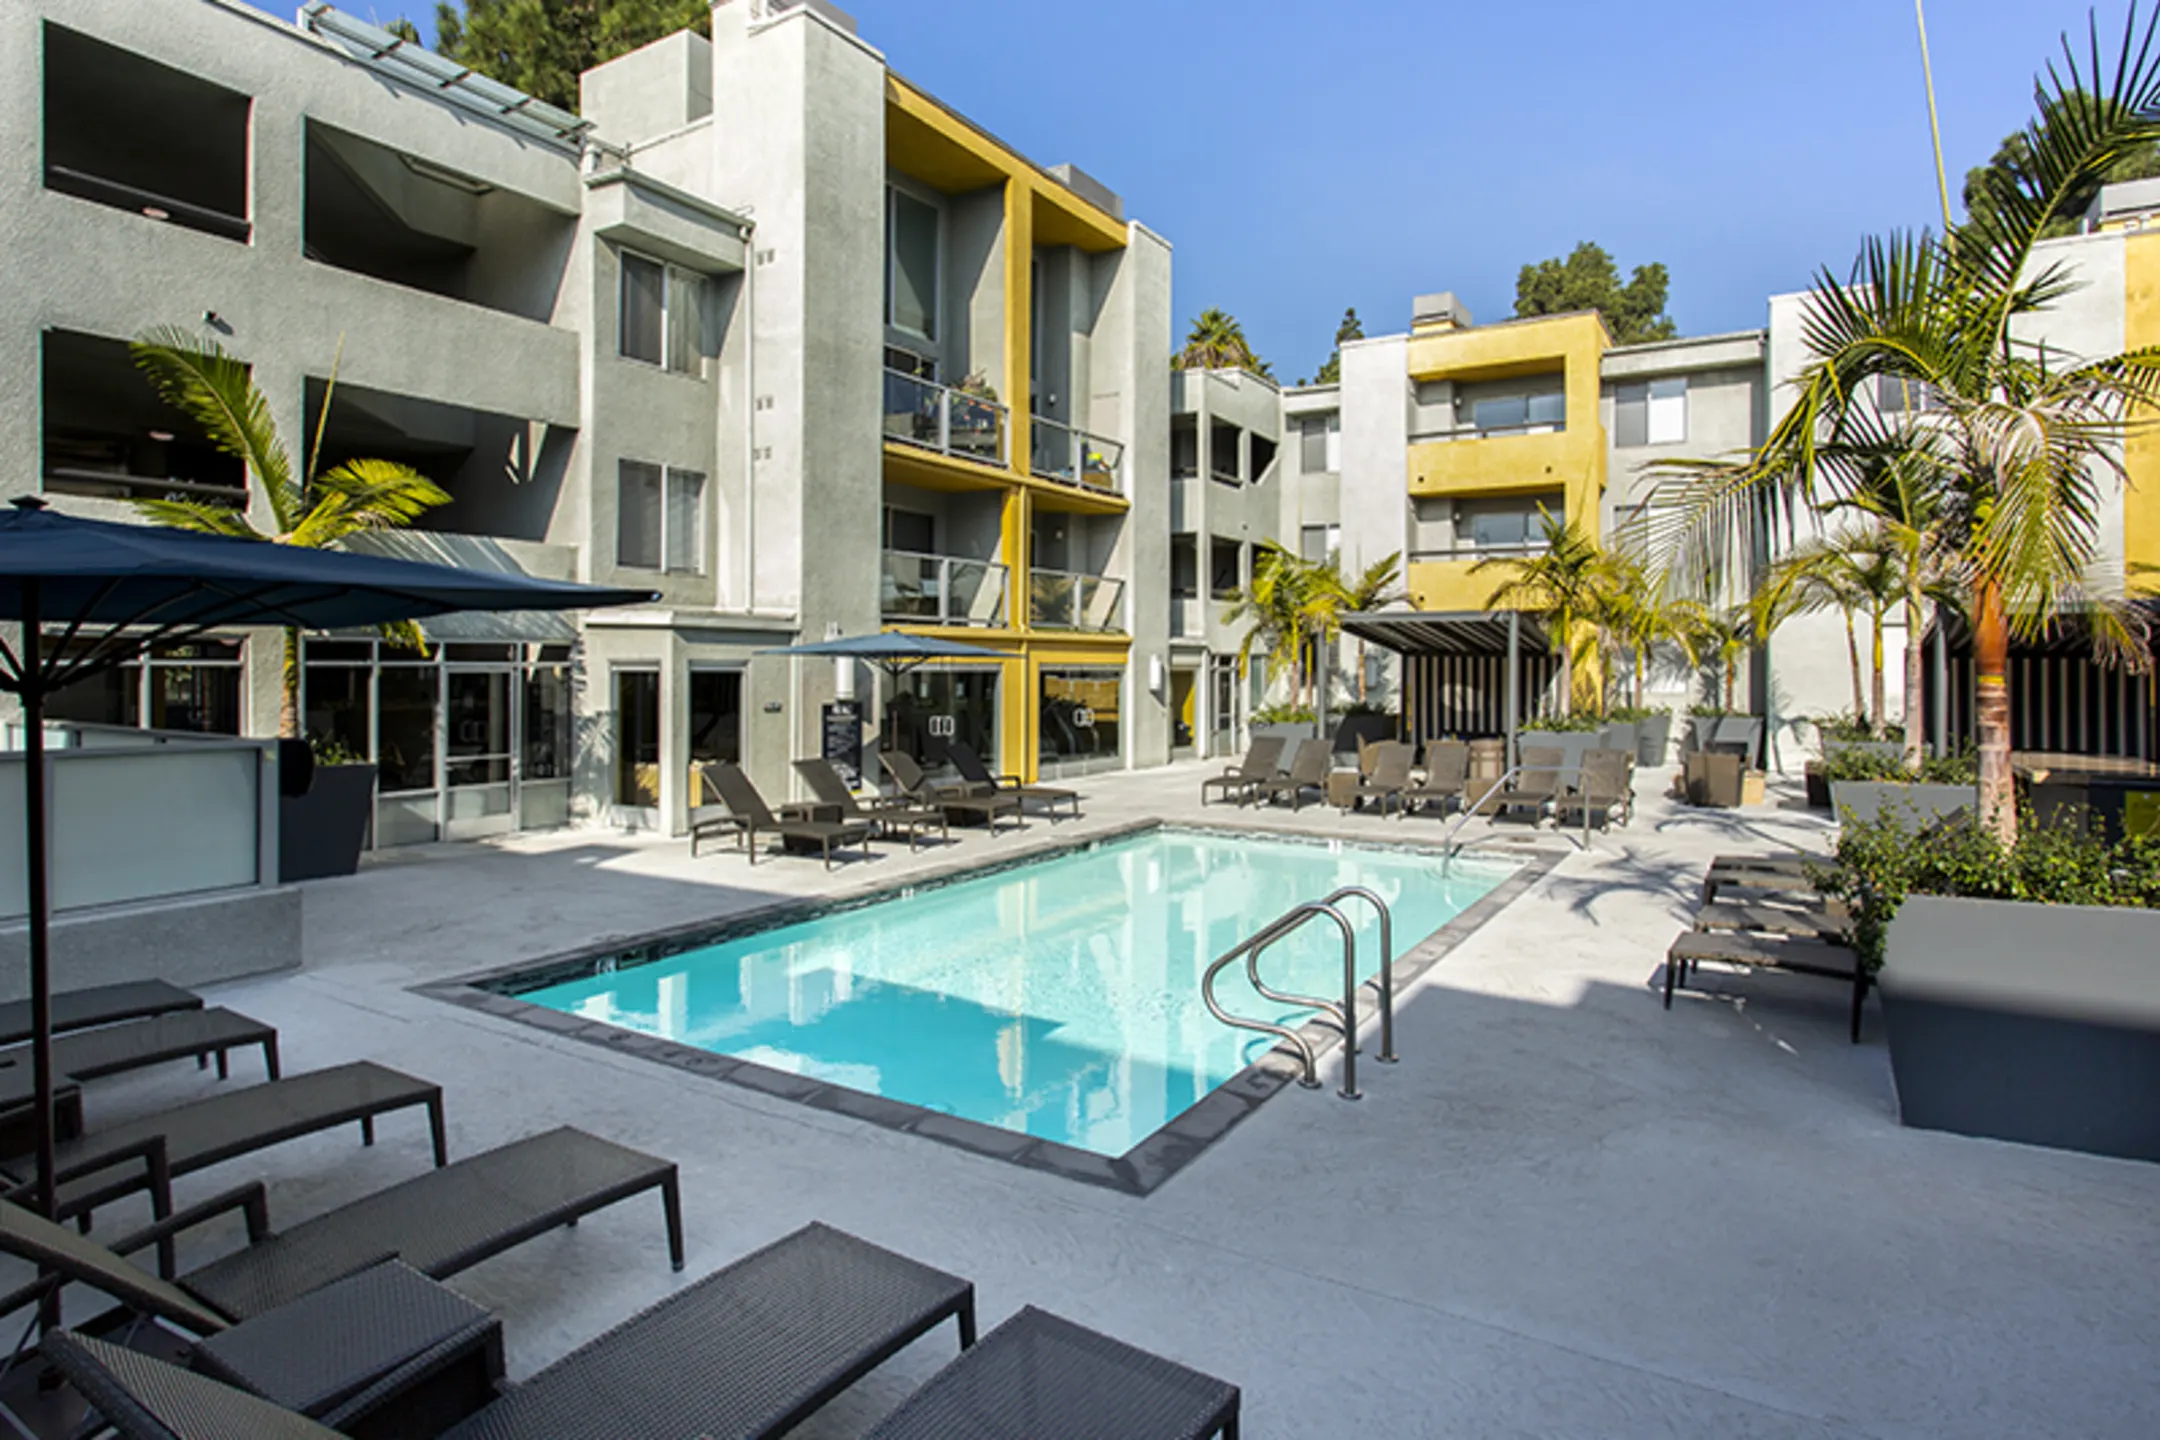 Pool - The Crescent at West Hollywood - West Hollywood, CA